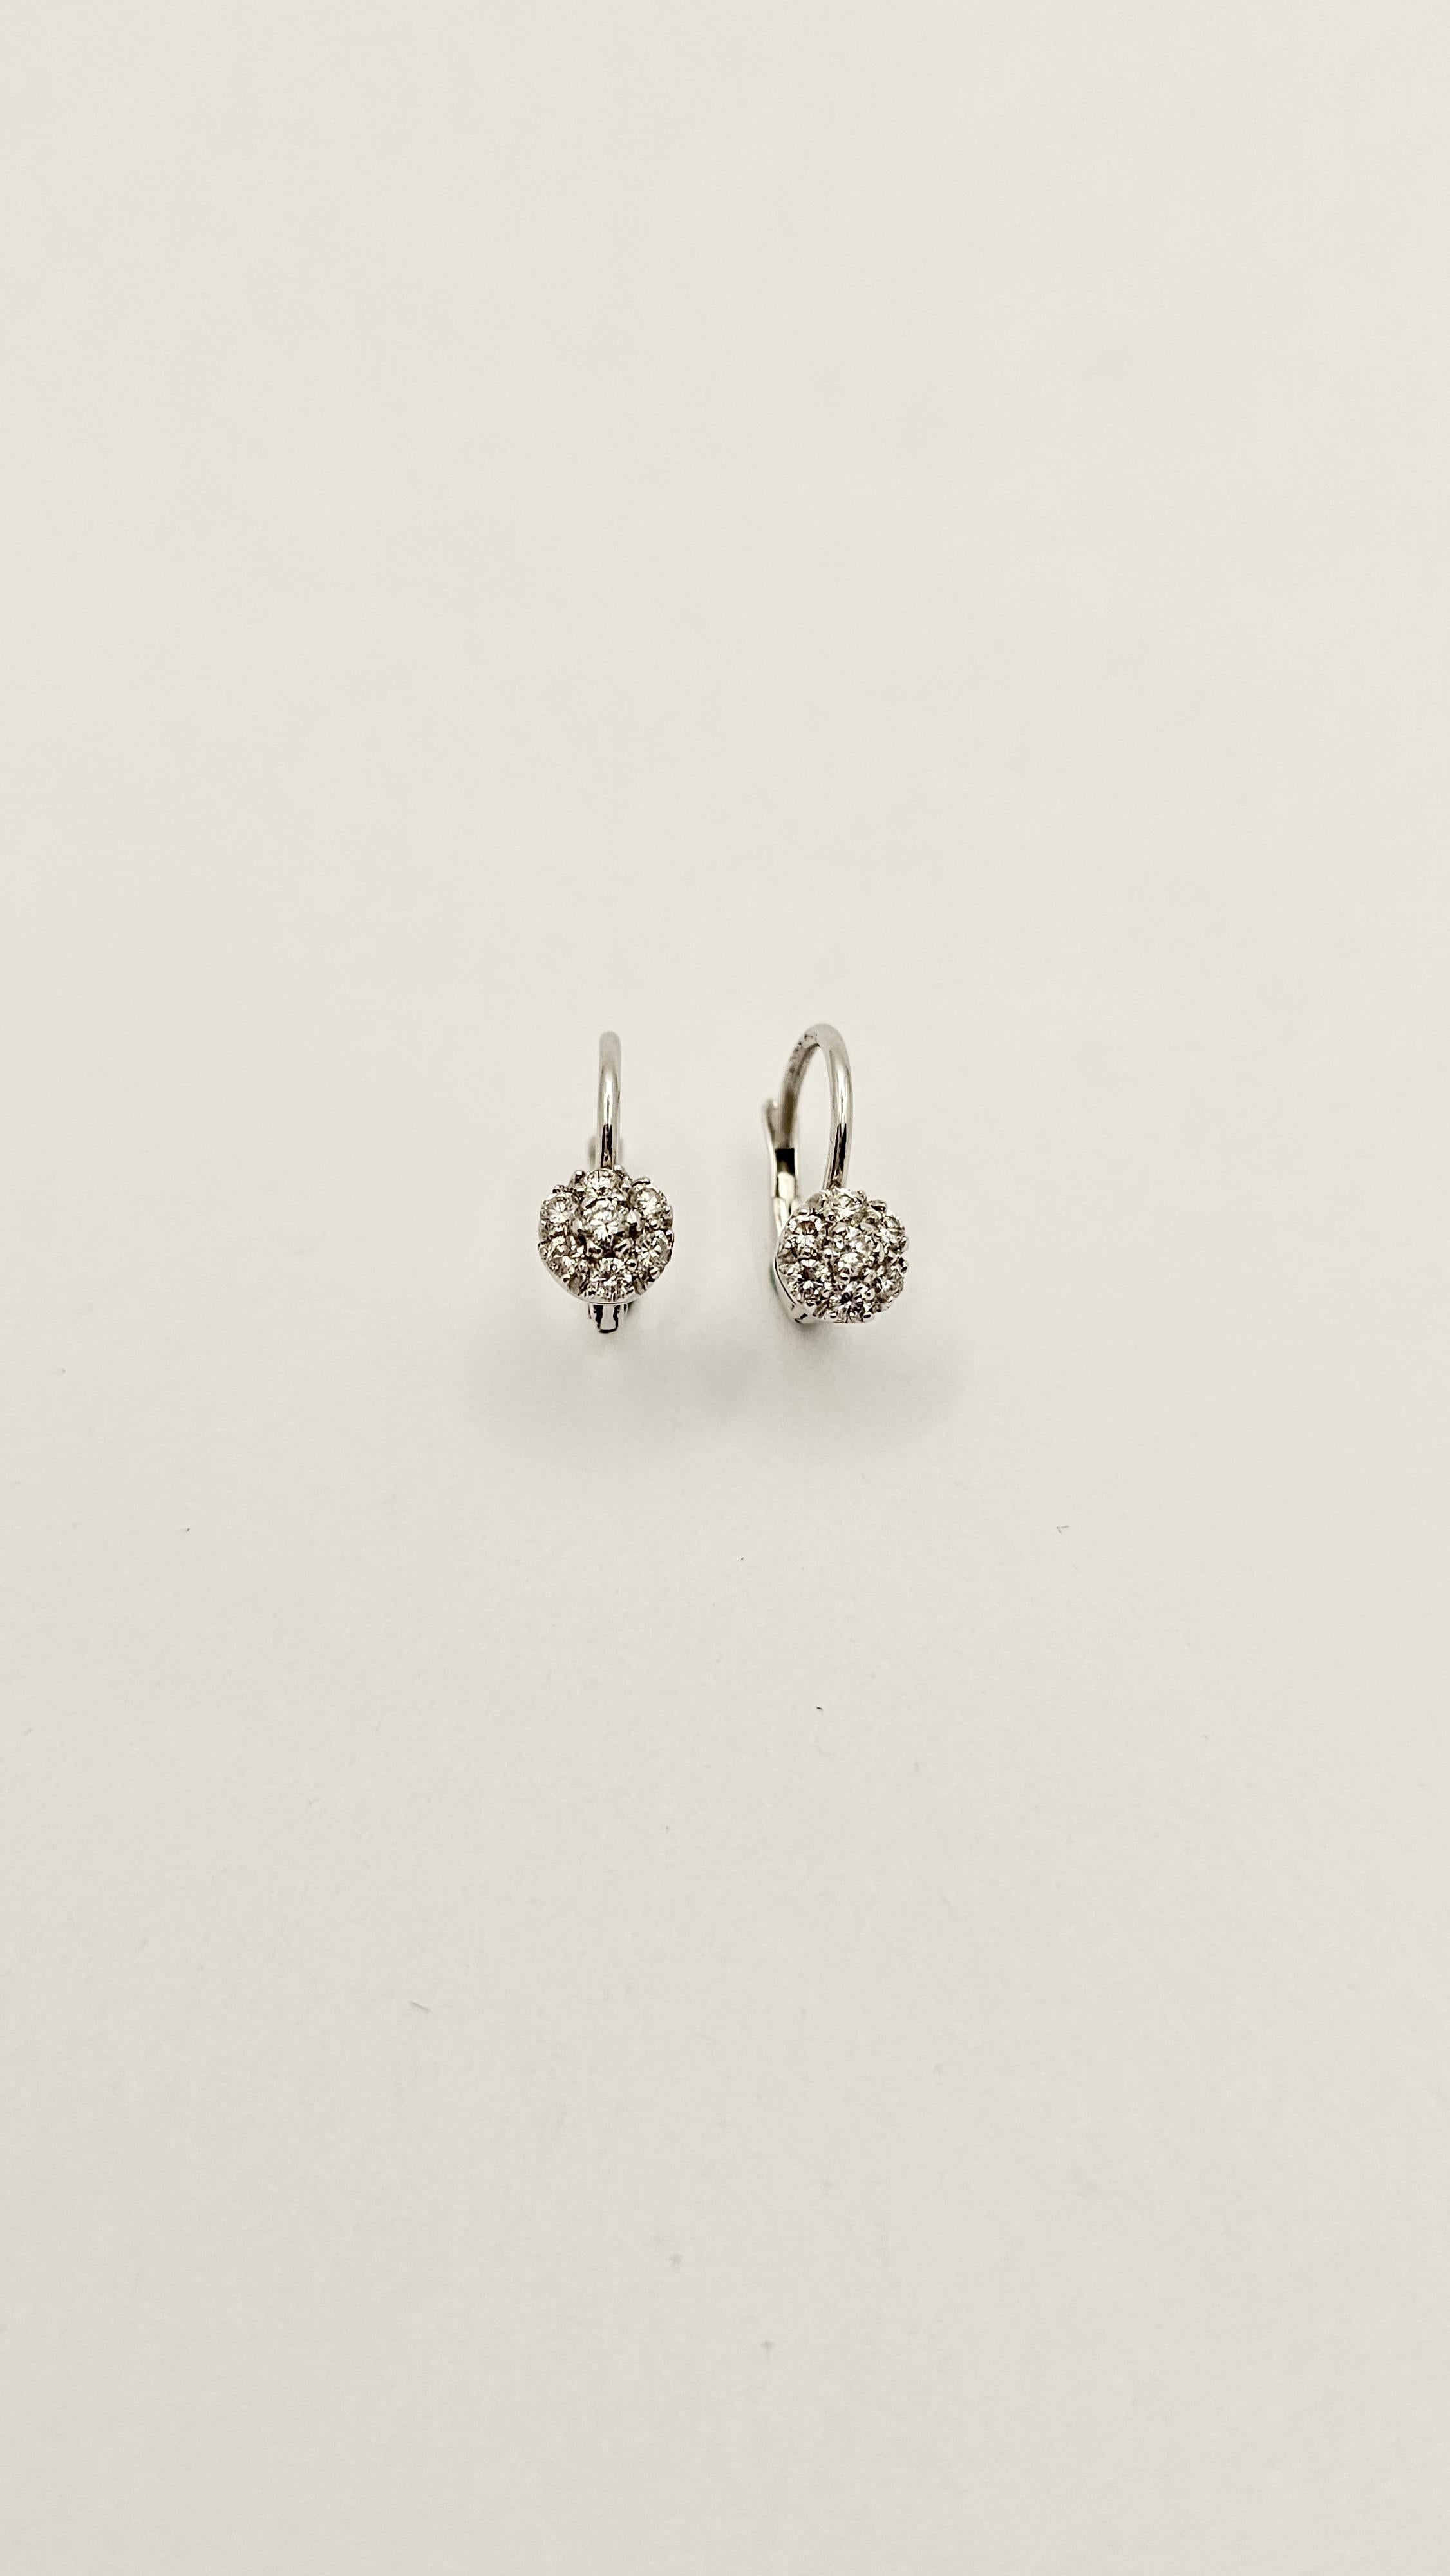 A classic pair of 18 kt white gold and Diamonds nun earrings.
The central part of the earring has a flower-shaped design in extra white Diamonds weighing 0.32 carats.
This model has a classic and very elegant design.
This model is very light and can